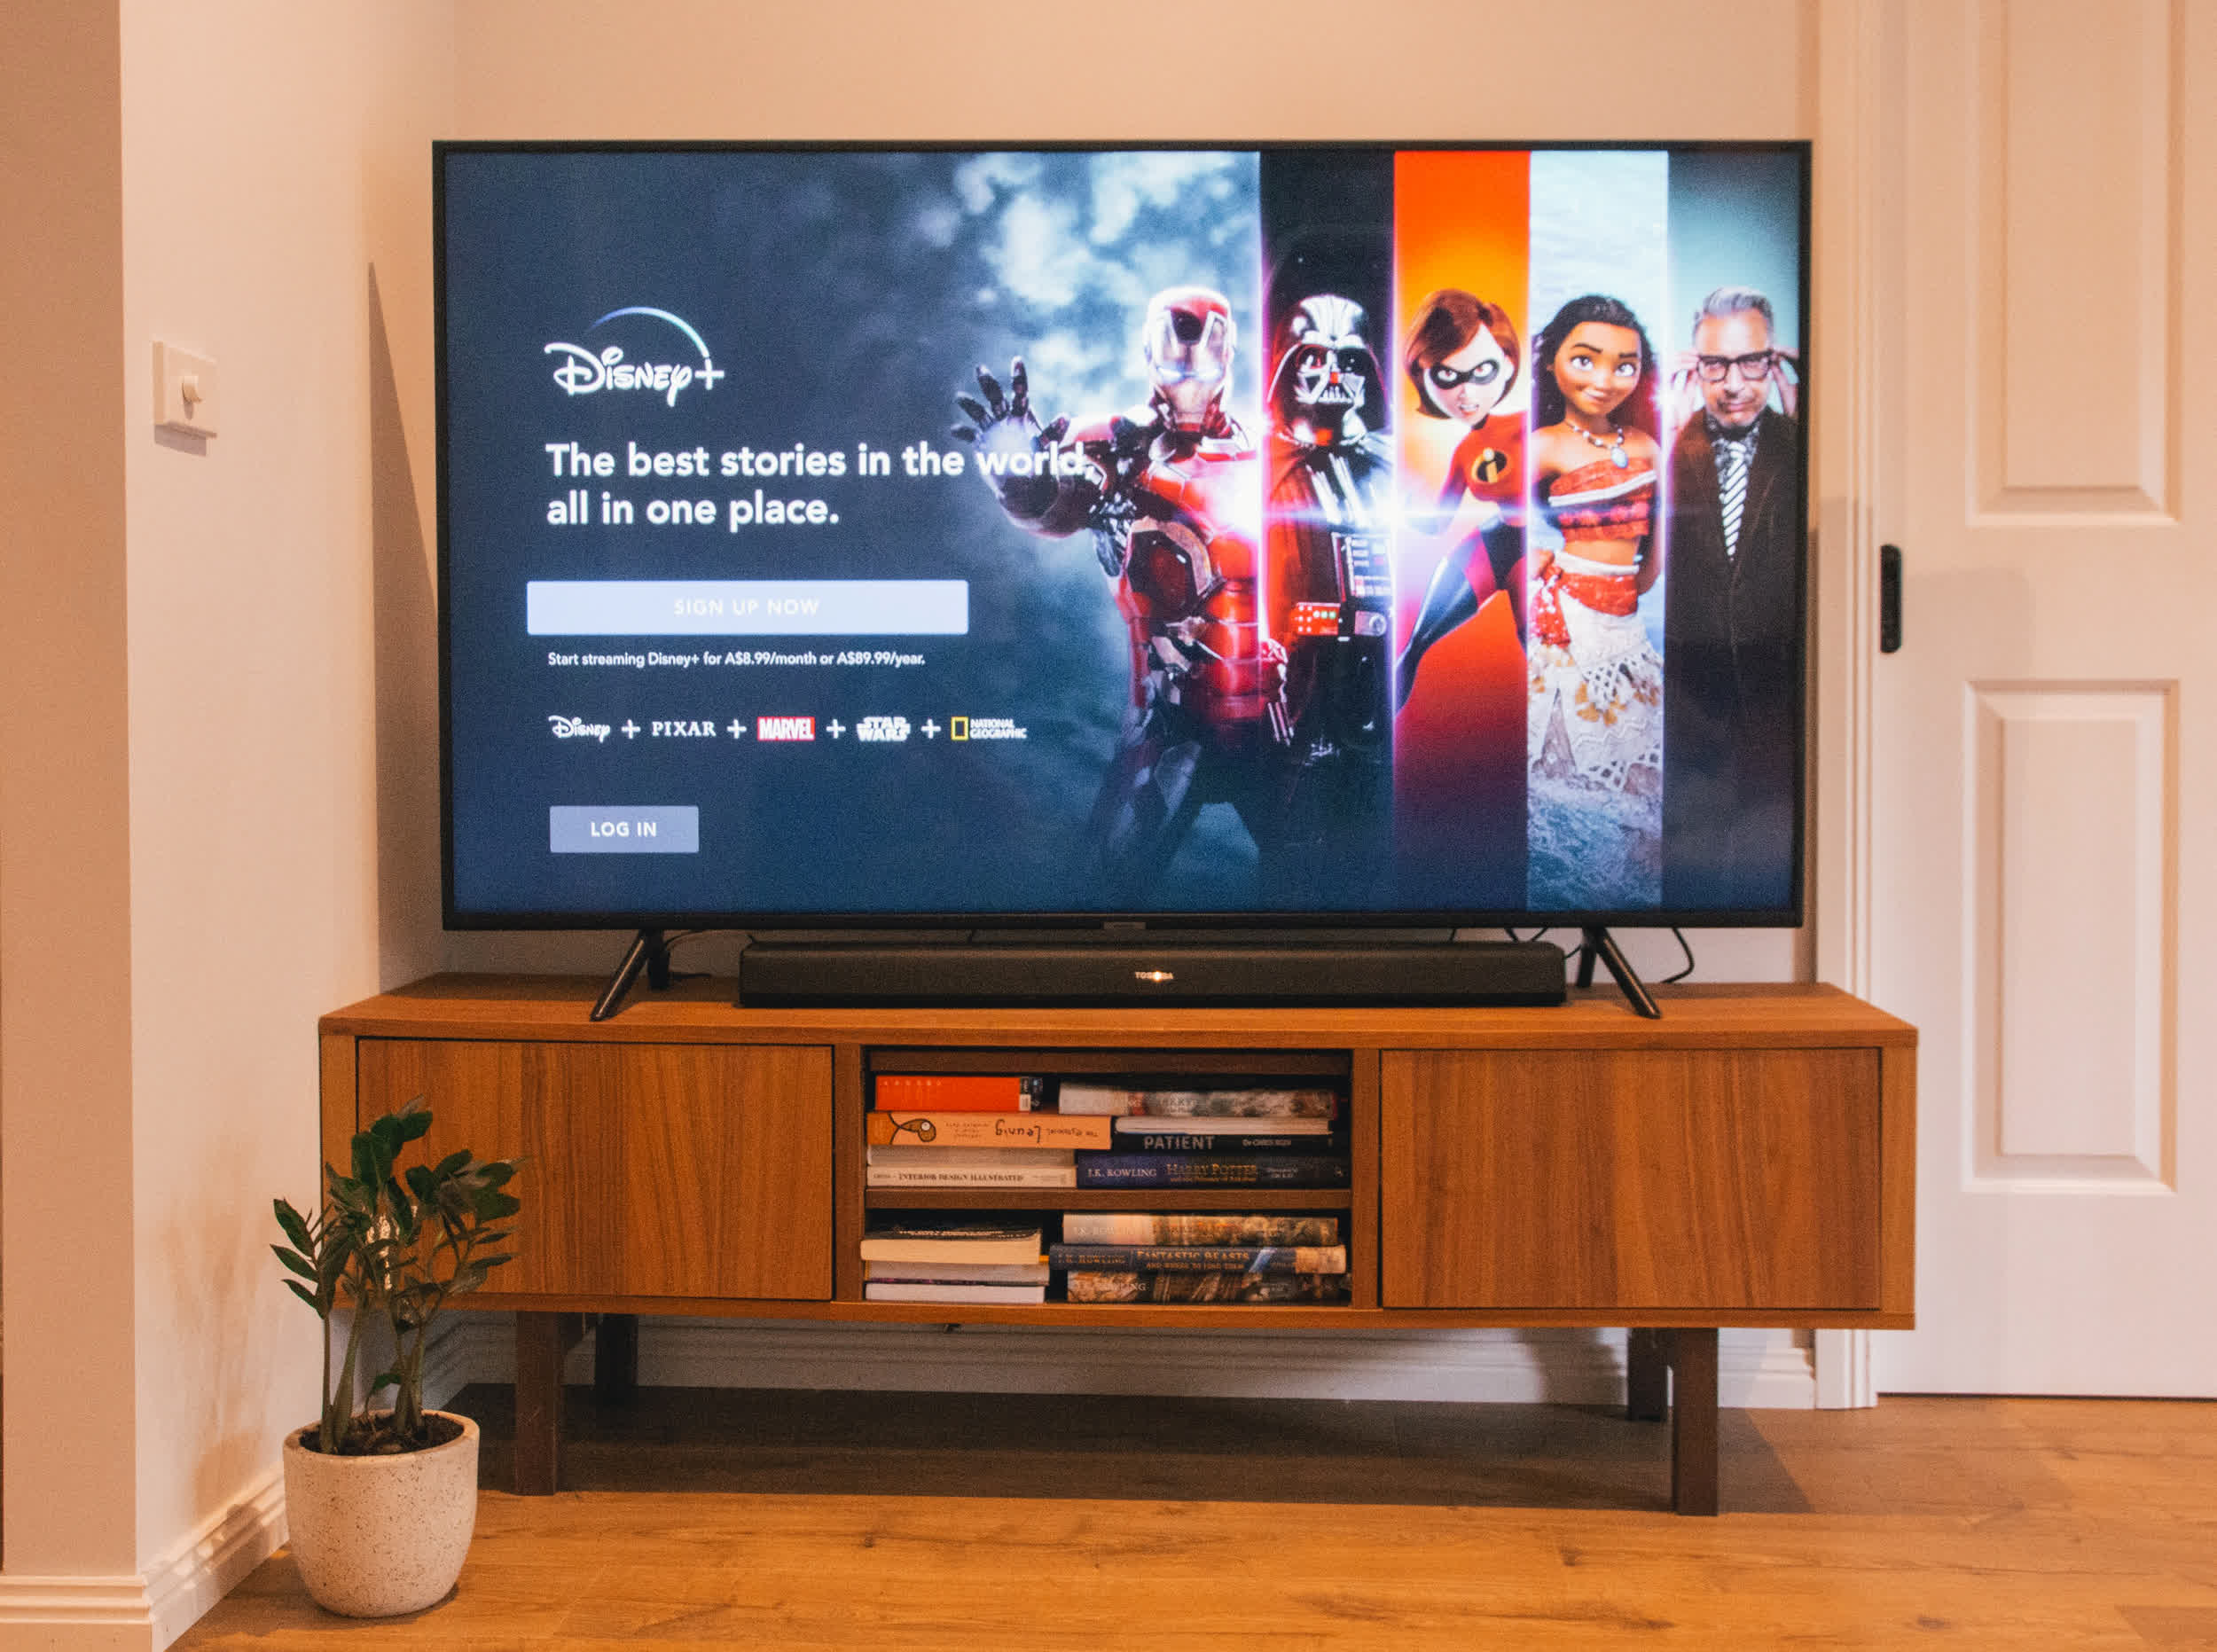 Disney now has more subscribers than Netflix, reveals price hikes & $7.99 ad-supported tier